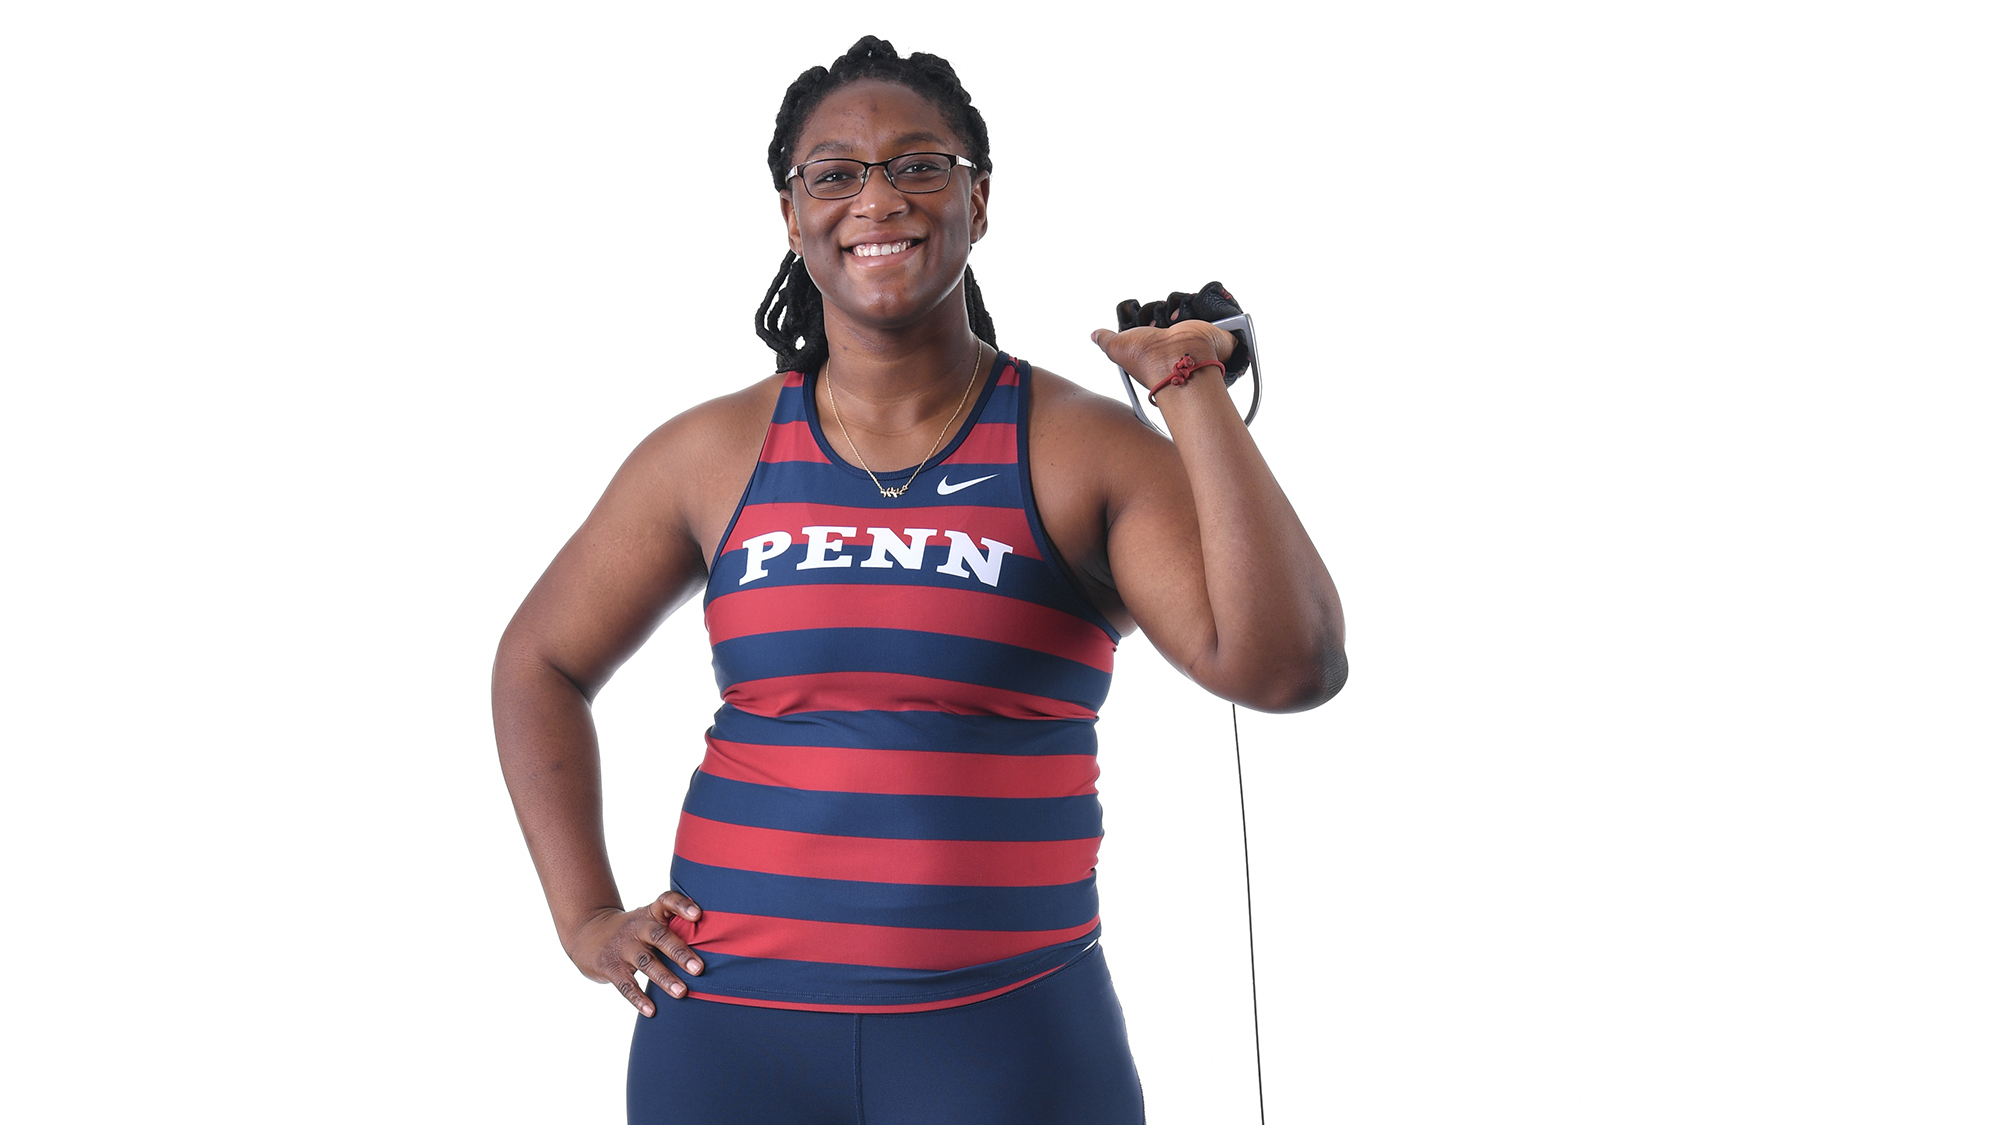 Mayyi Mahama of the track and field team poses in her uniform against a white background.